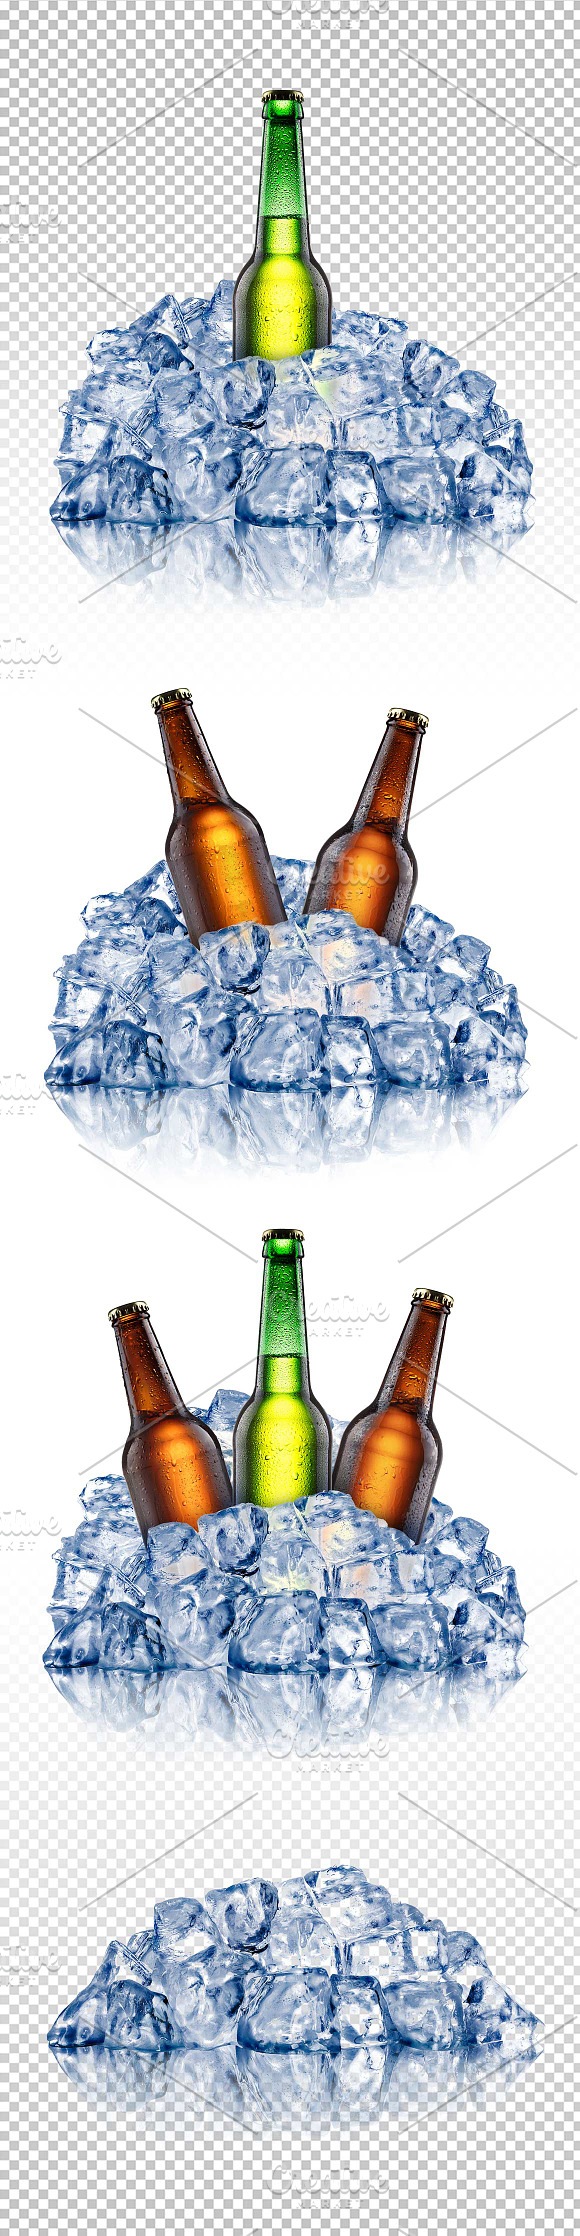 Chilled bottles in rough ice in Objects - product preview 1